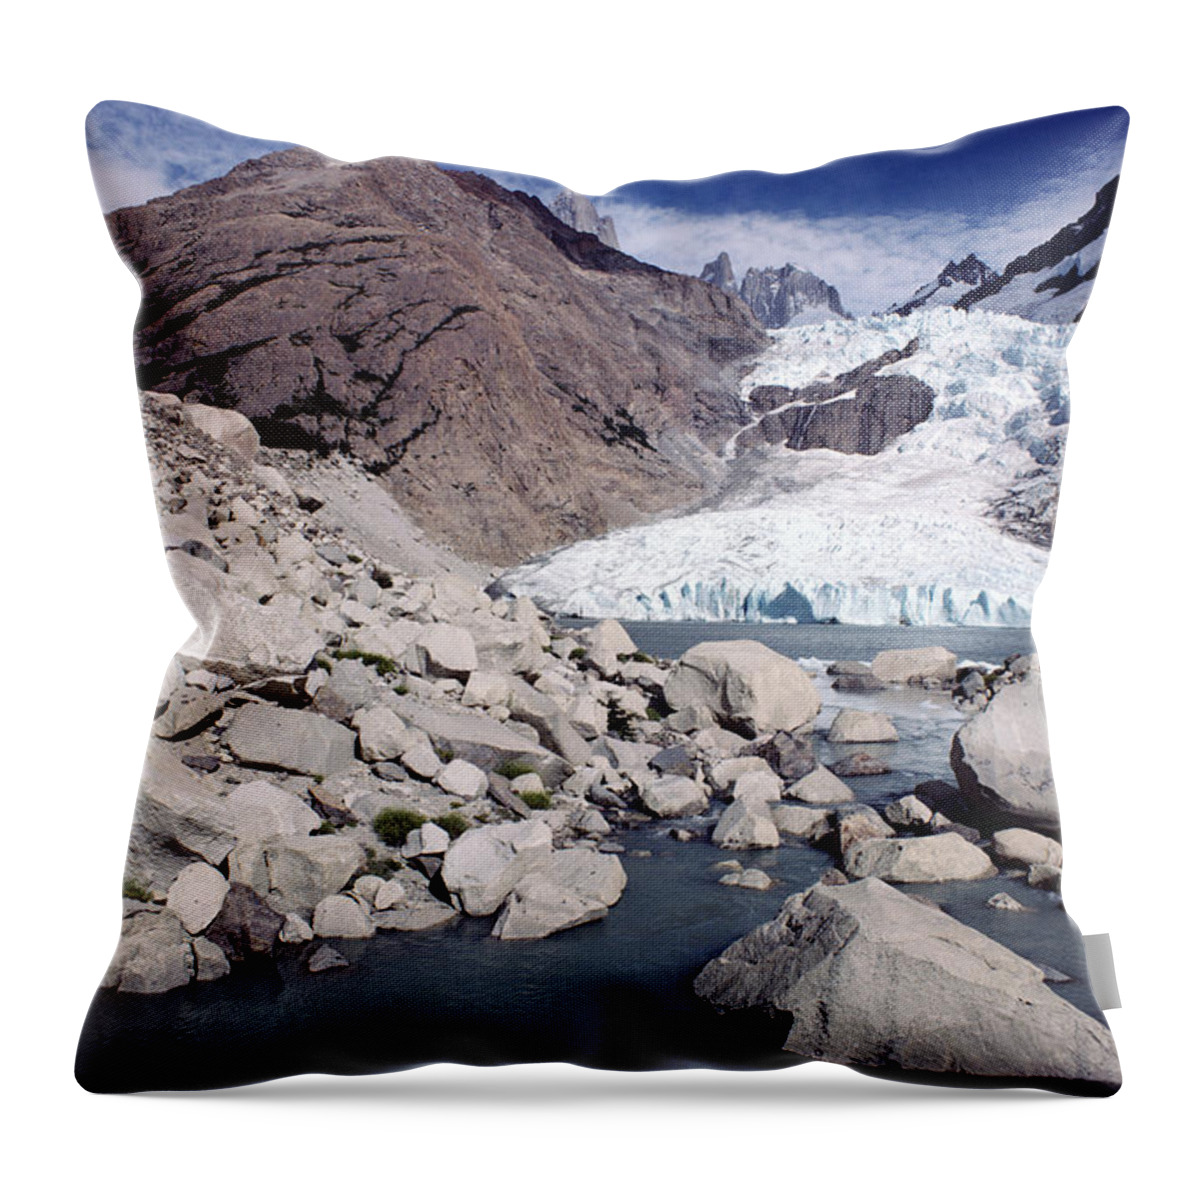 Feb0514 Throw Pillow featuring the photograph Los Glaciares Np Patagonia Argentina by Tui De Roy